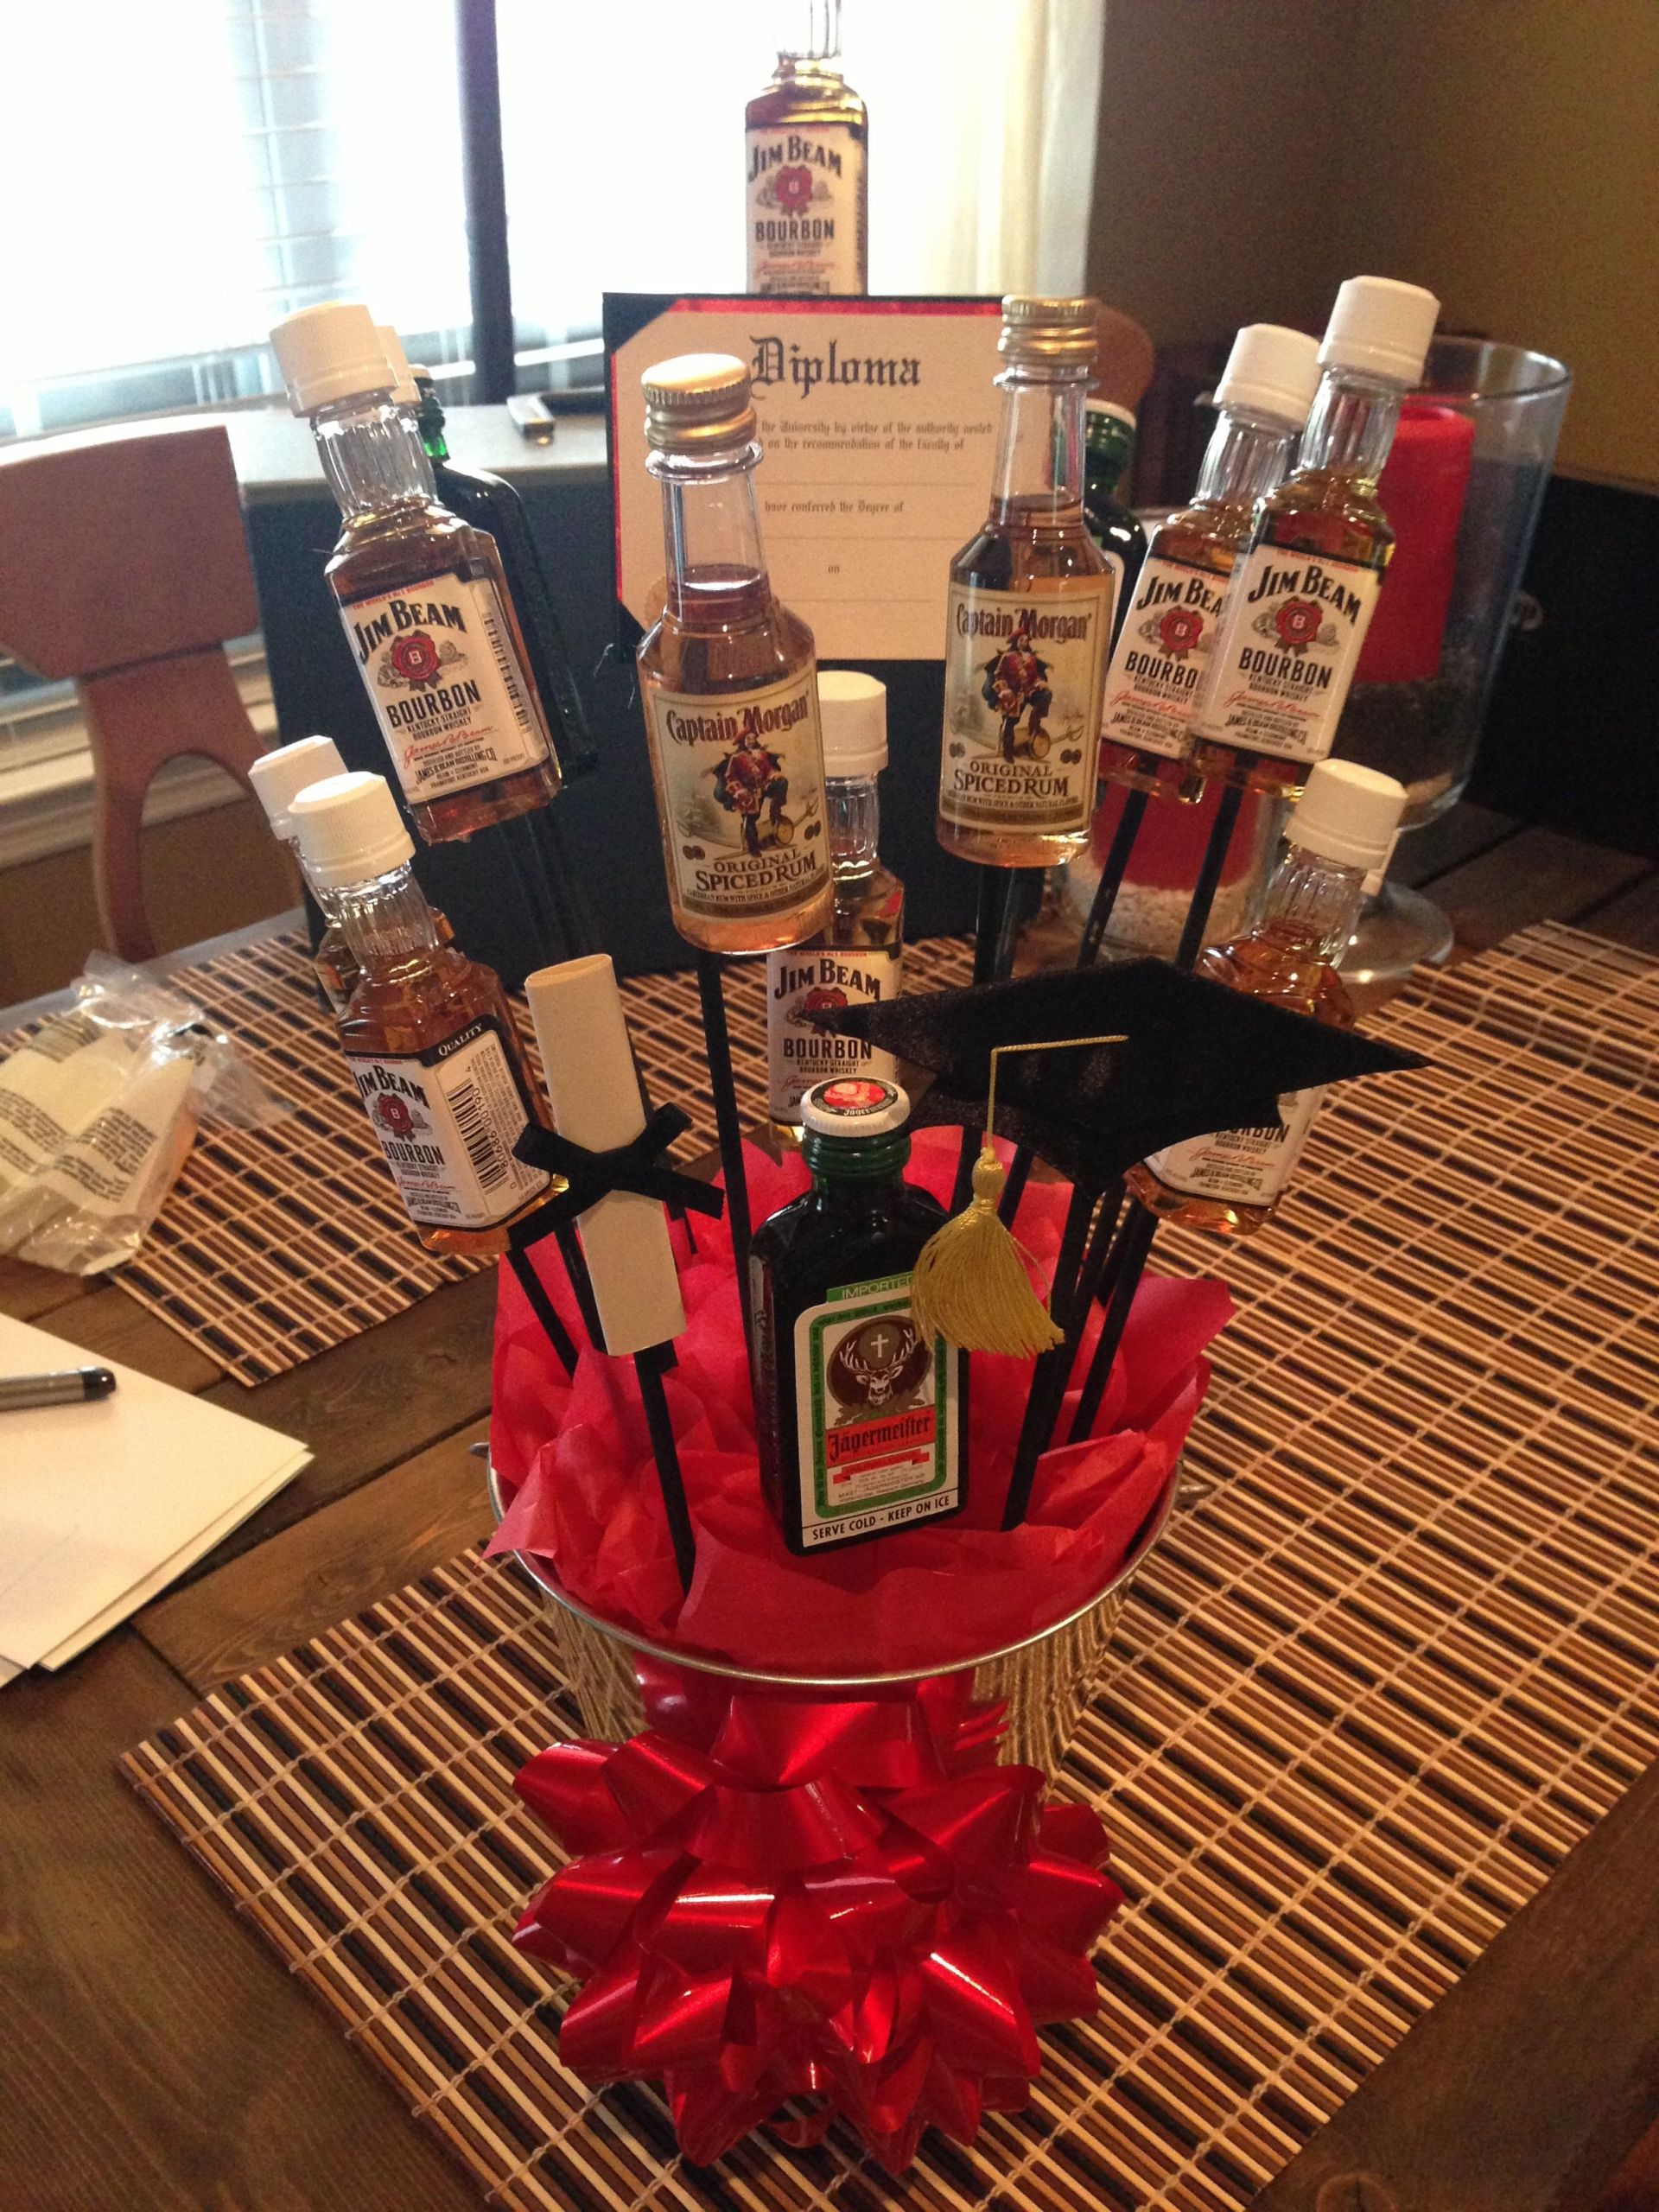 College Graduation Gift Ideas For Guys
 Alcohol bouquet for a guy graduating college